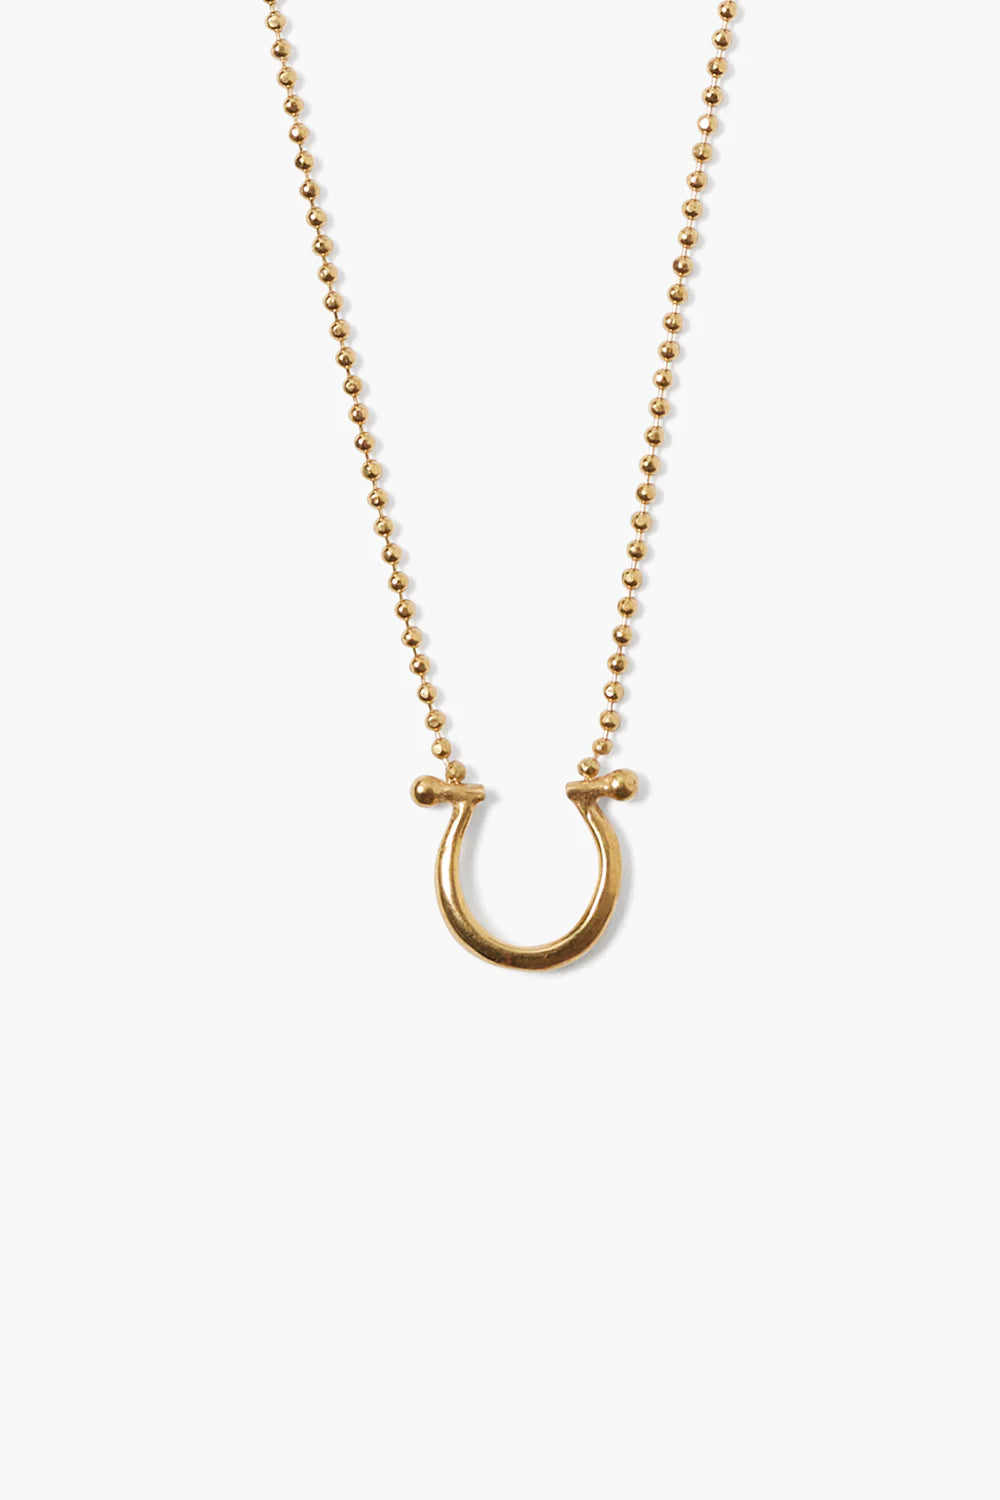 HORSESHOE NECKLACE IN YELLOW GOLD - Romi Boutique